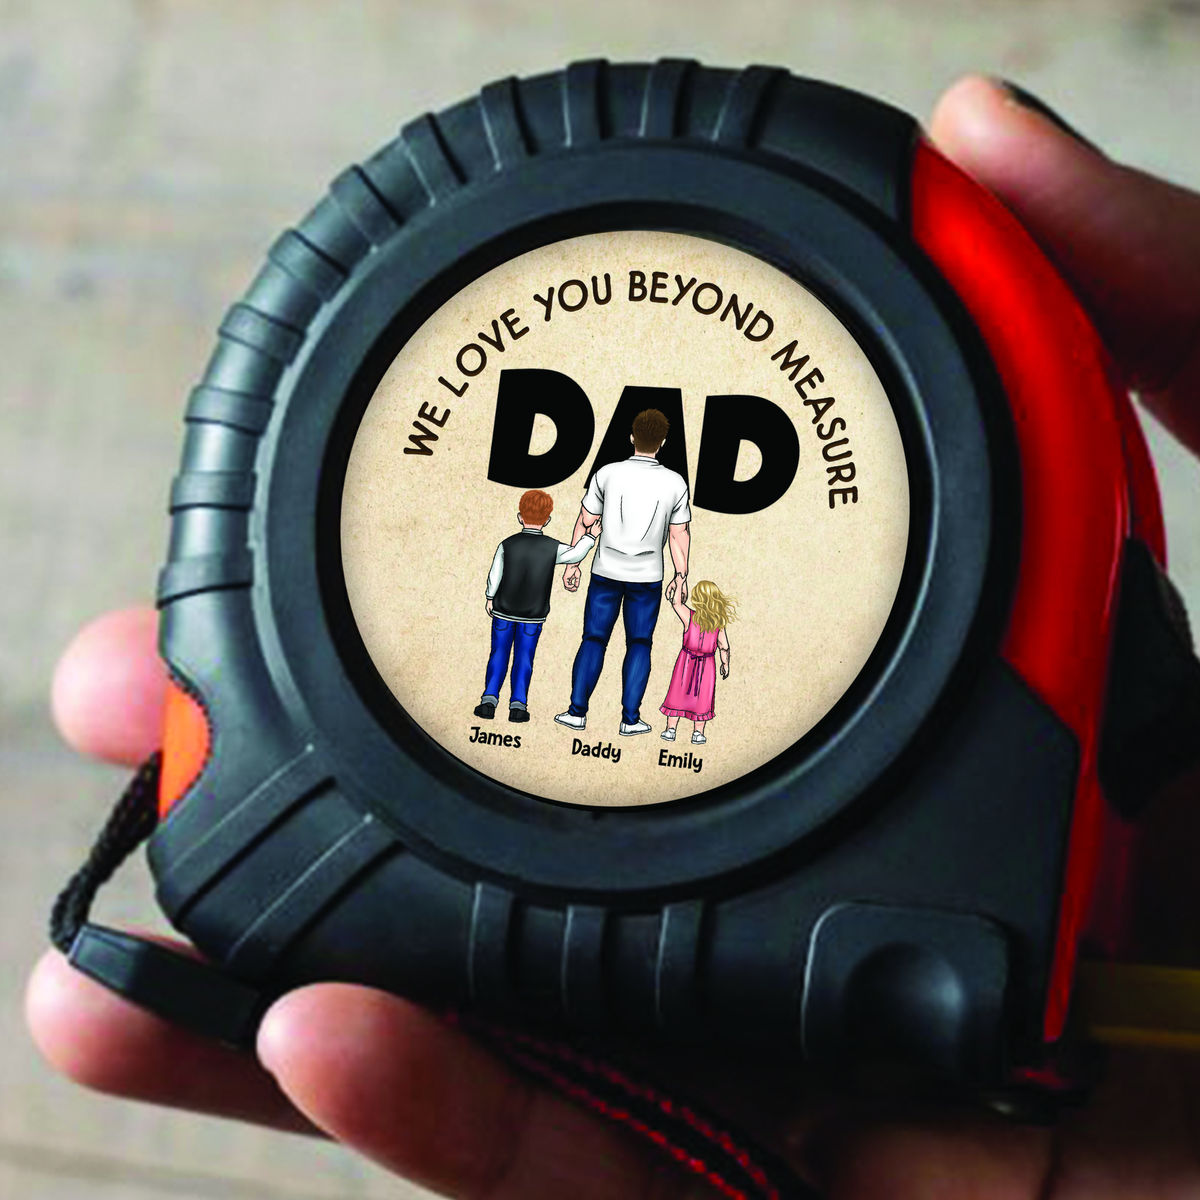 Personalized Tape Measure - This Dad is Loved Beyond Measure (29248)_3